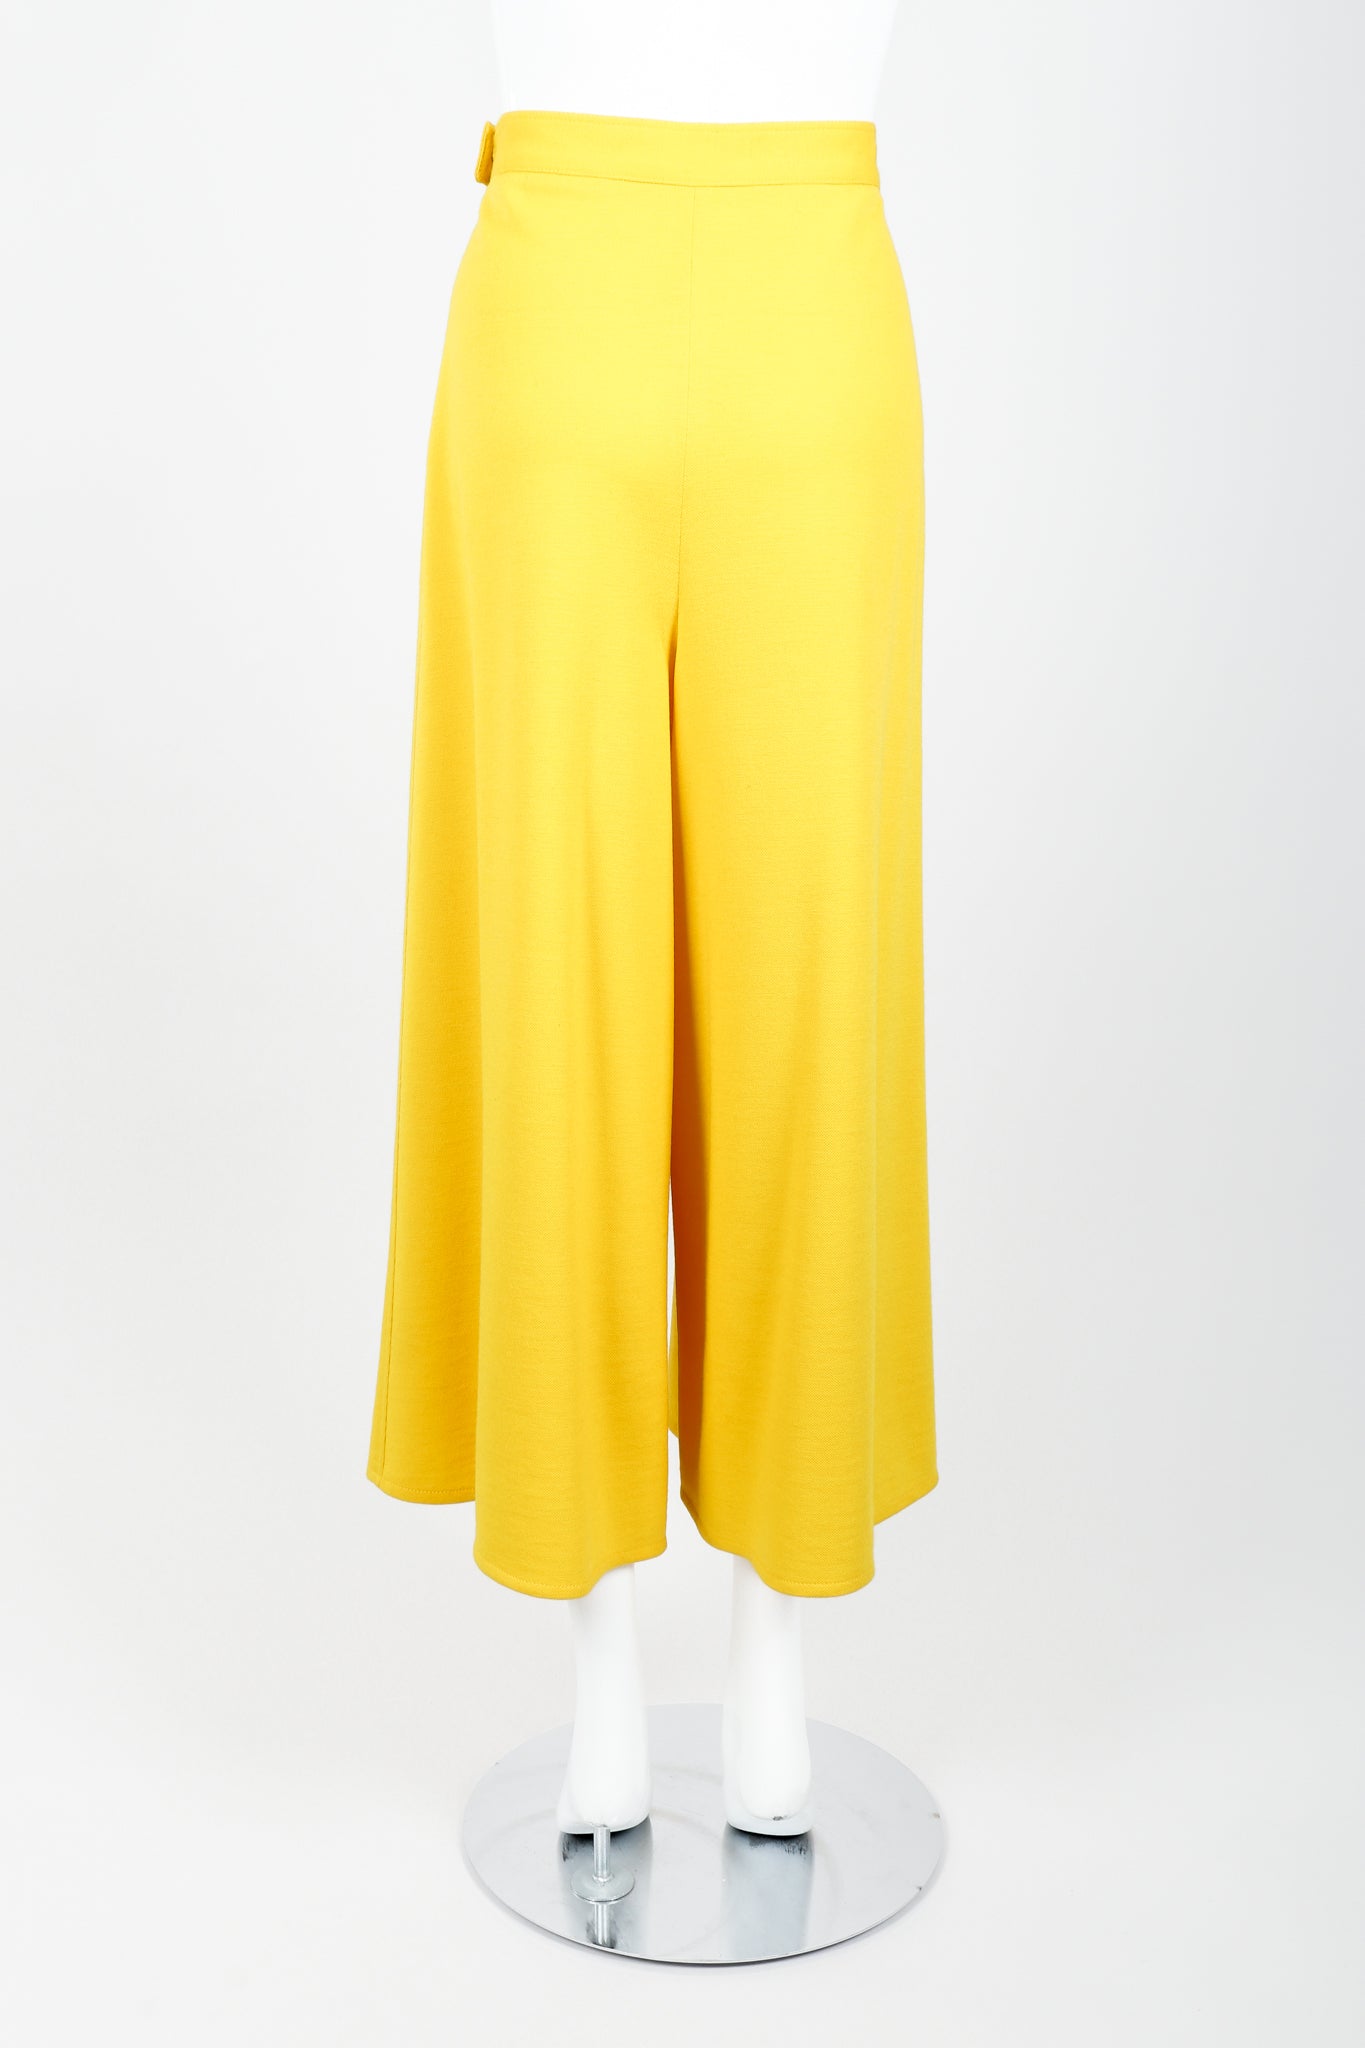 Vintage Sonia Rykiel Yellow Knit Gaucho Pant on Mannequin Back at Recess Los Angeles